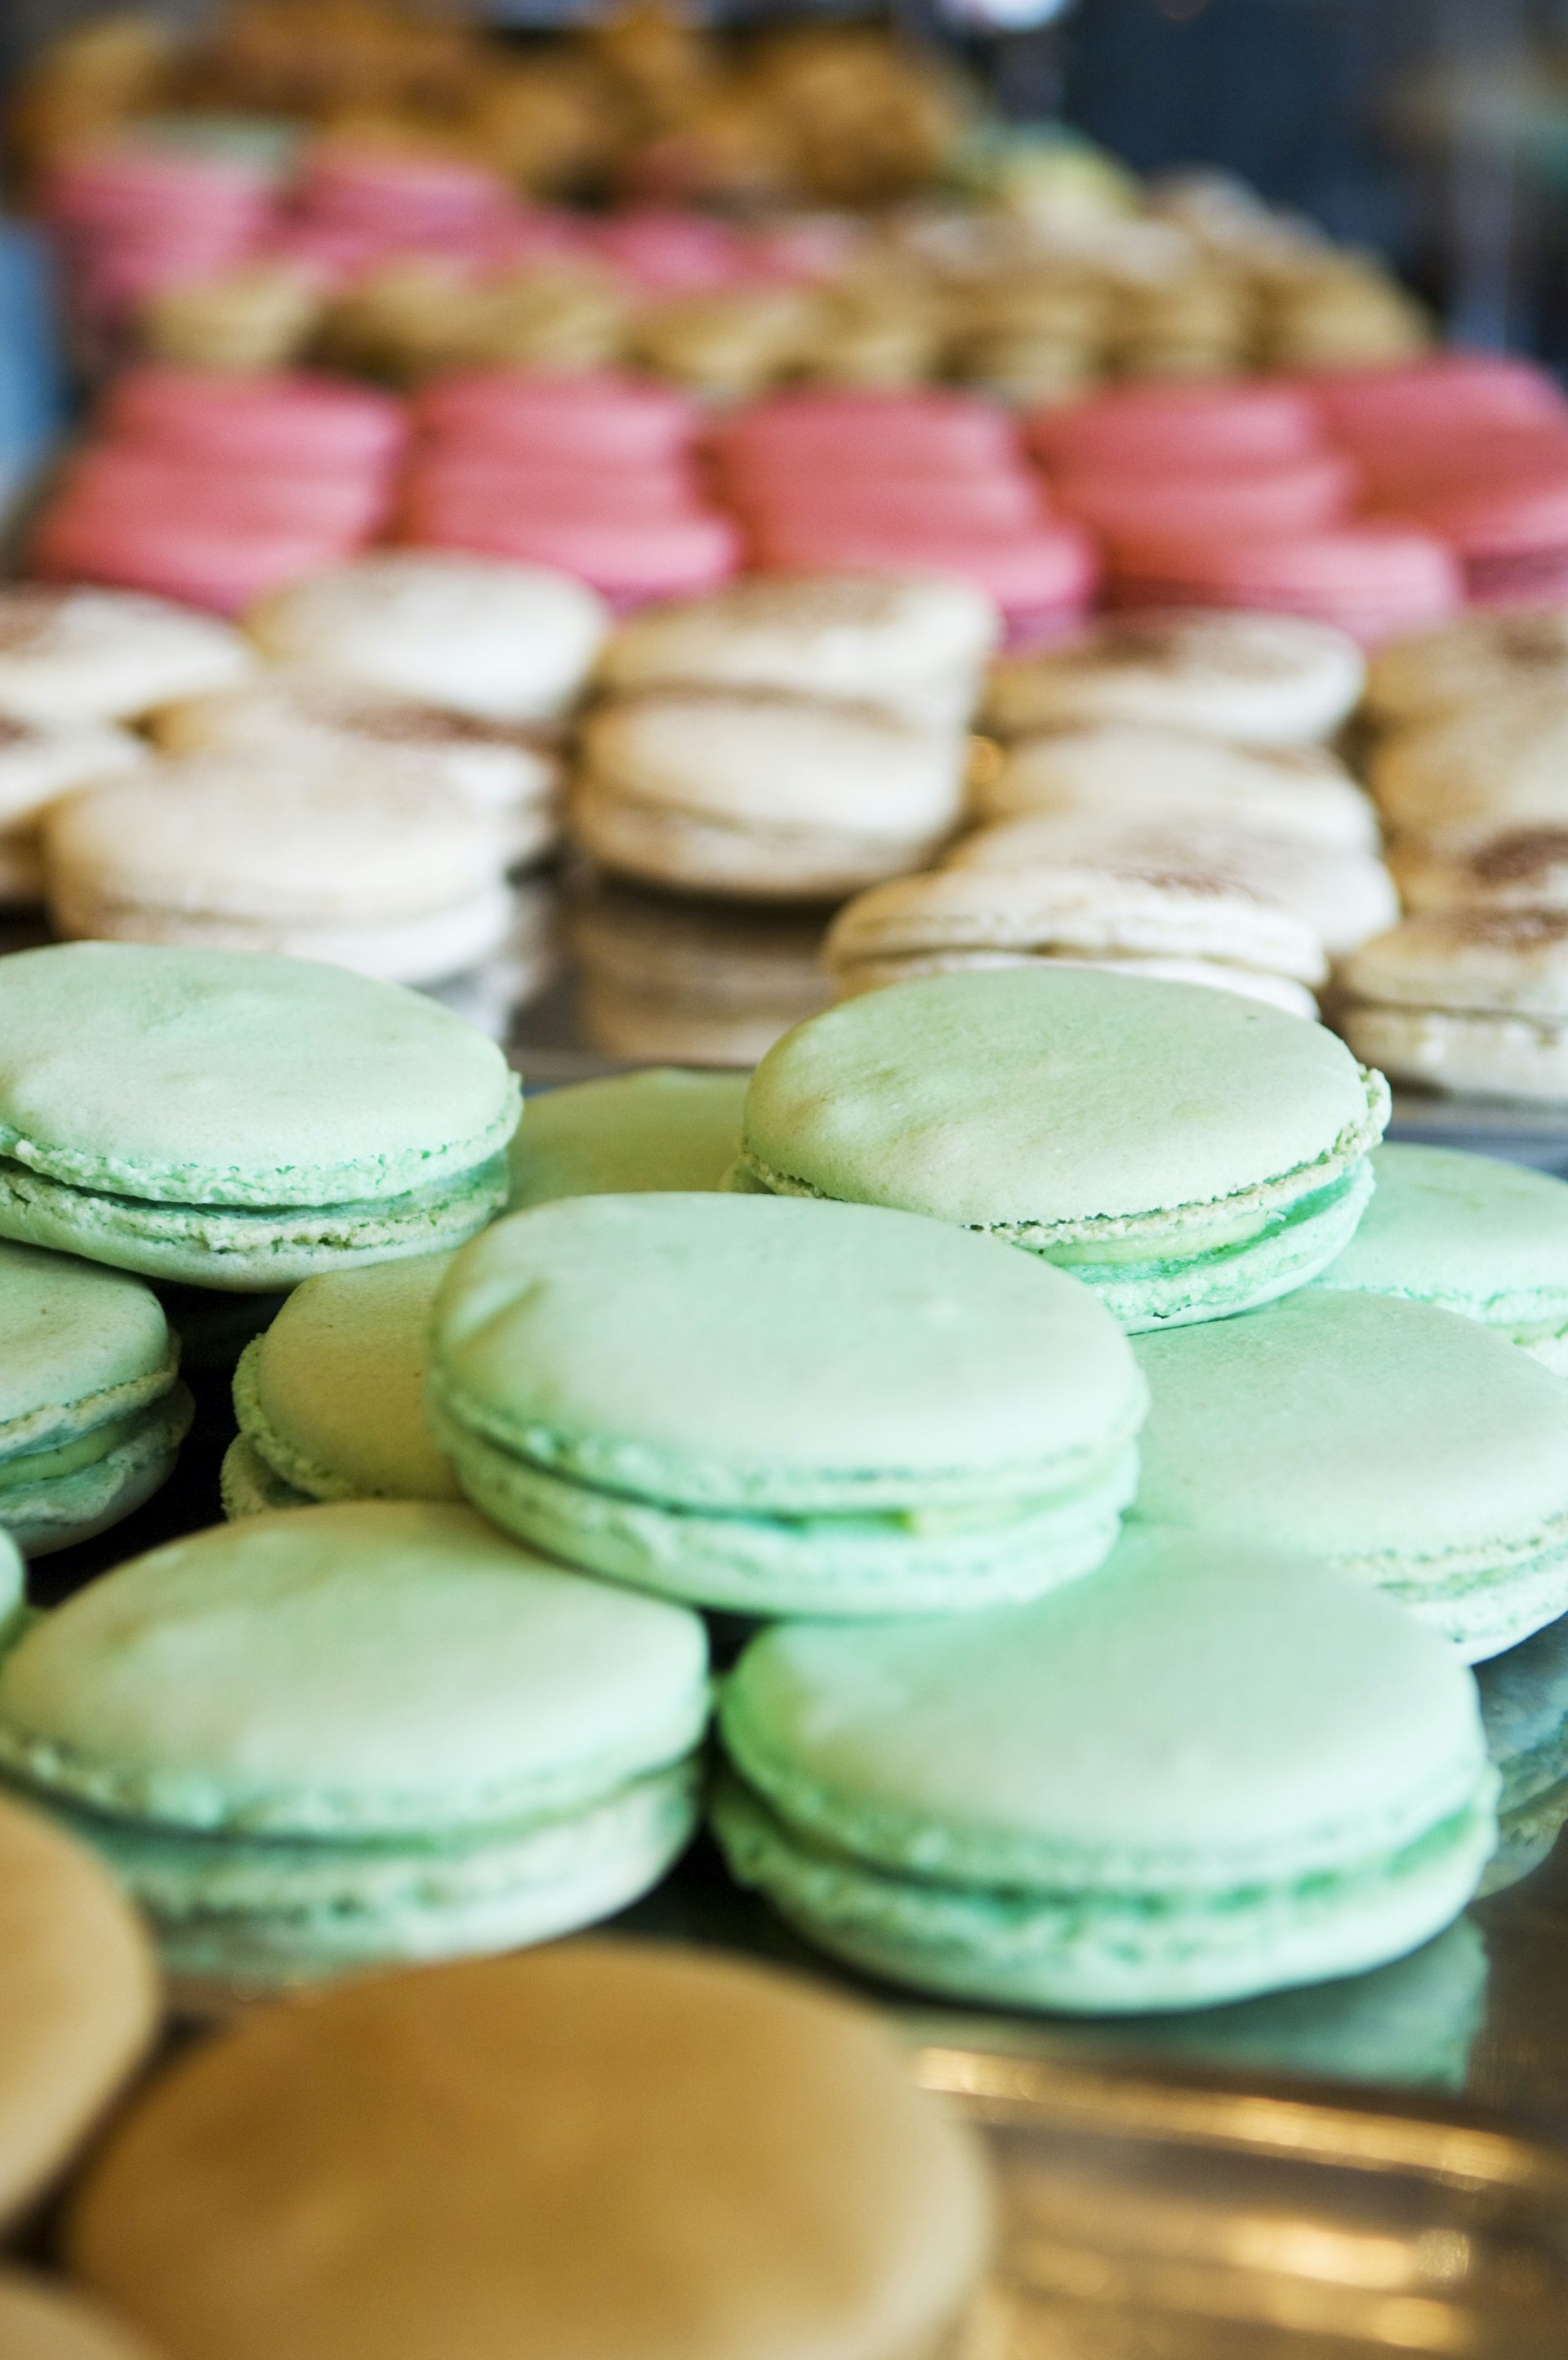 Brightly-coloured macaroons for sale at Angelina Tea Room in Paris, France.